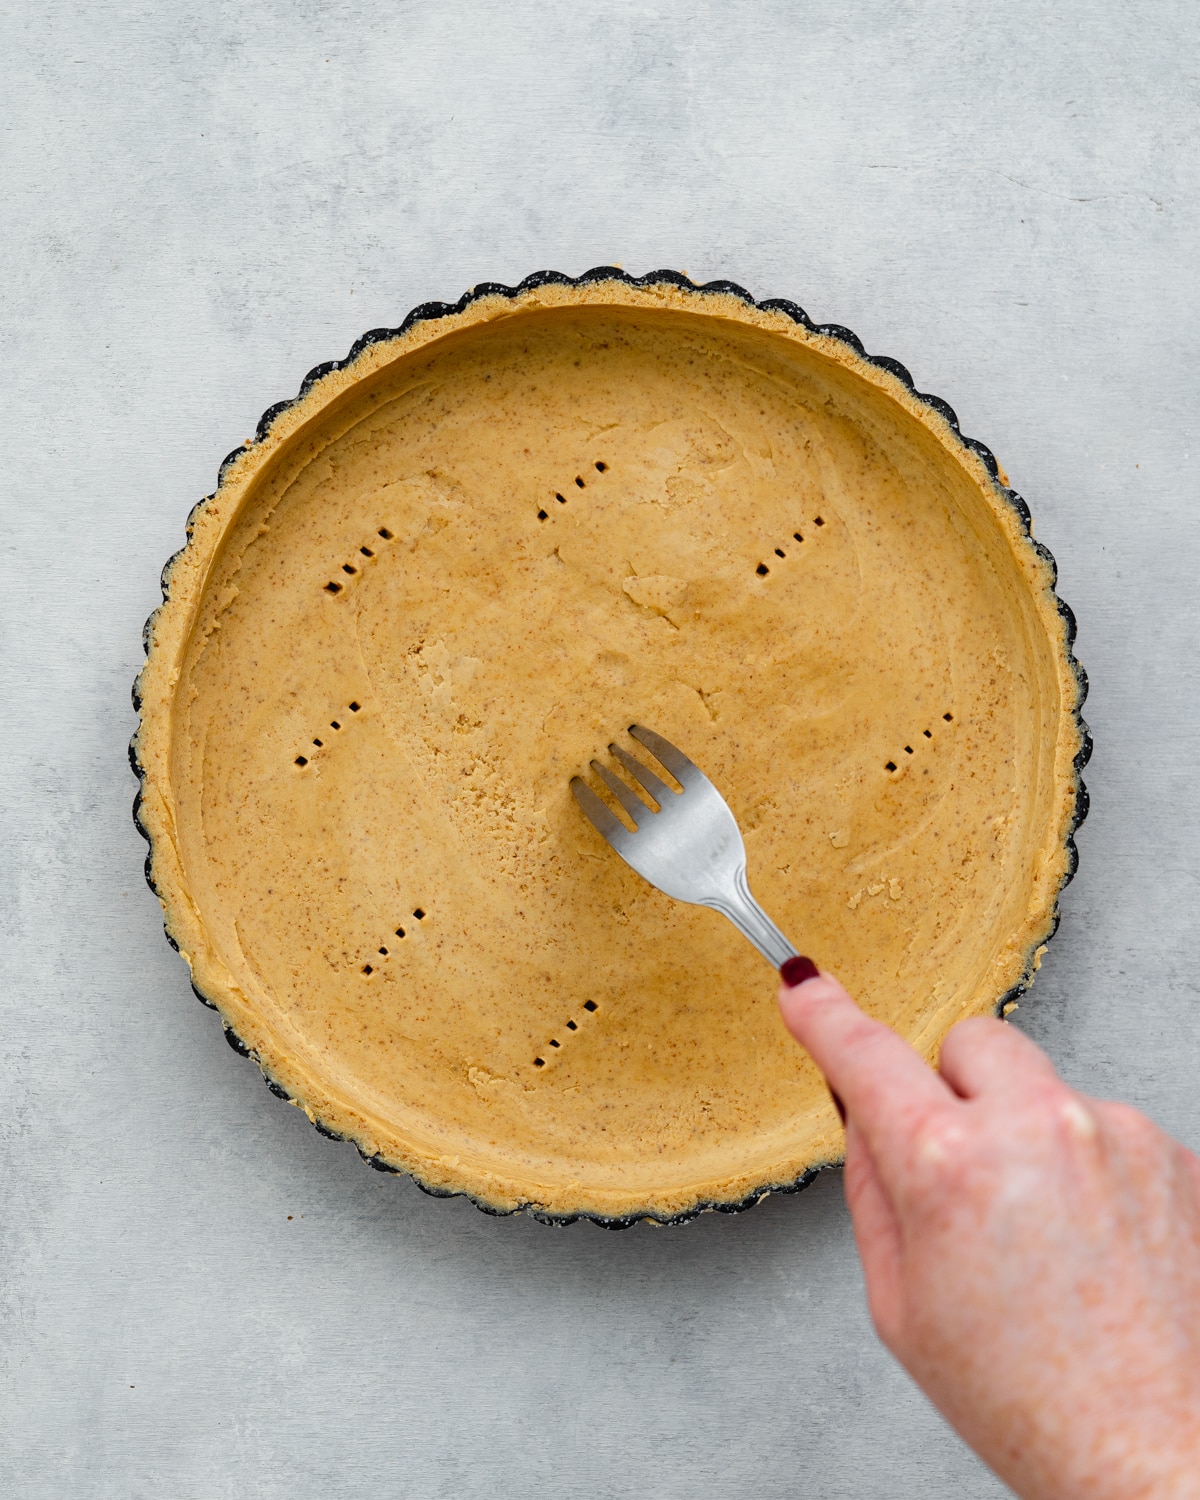 piercing holes into a tart shell with a fork.